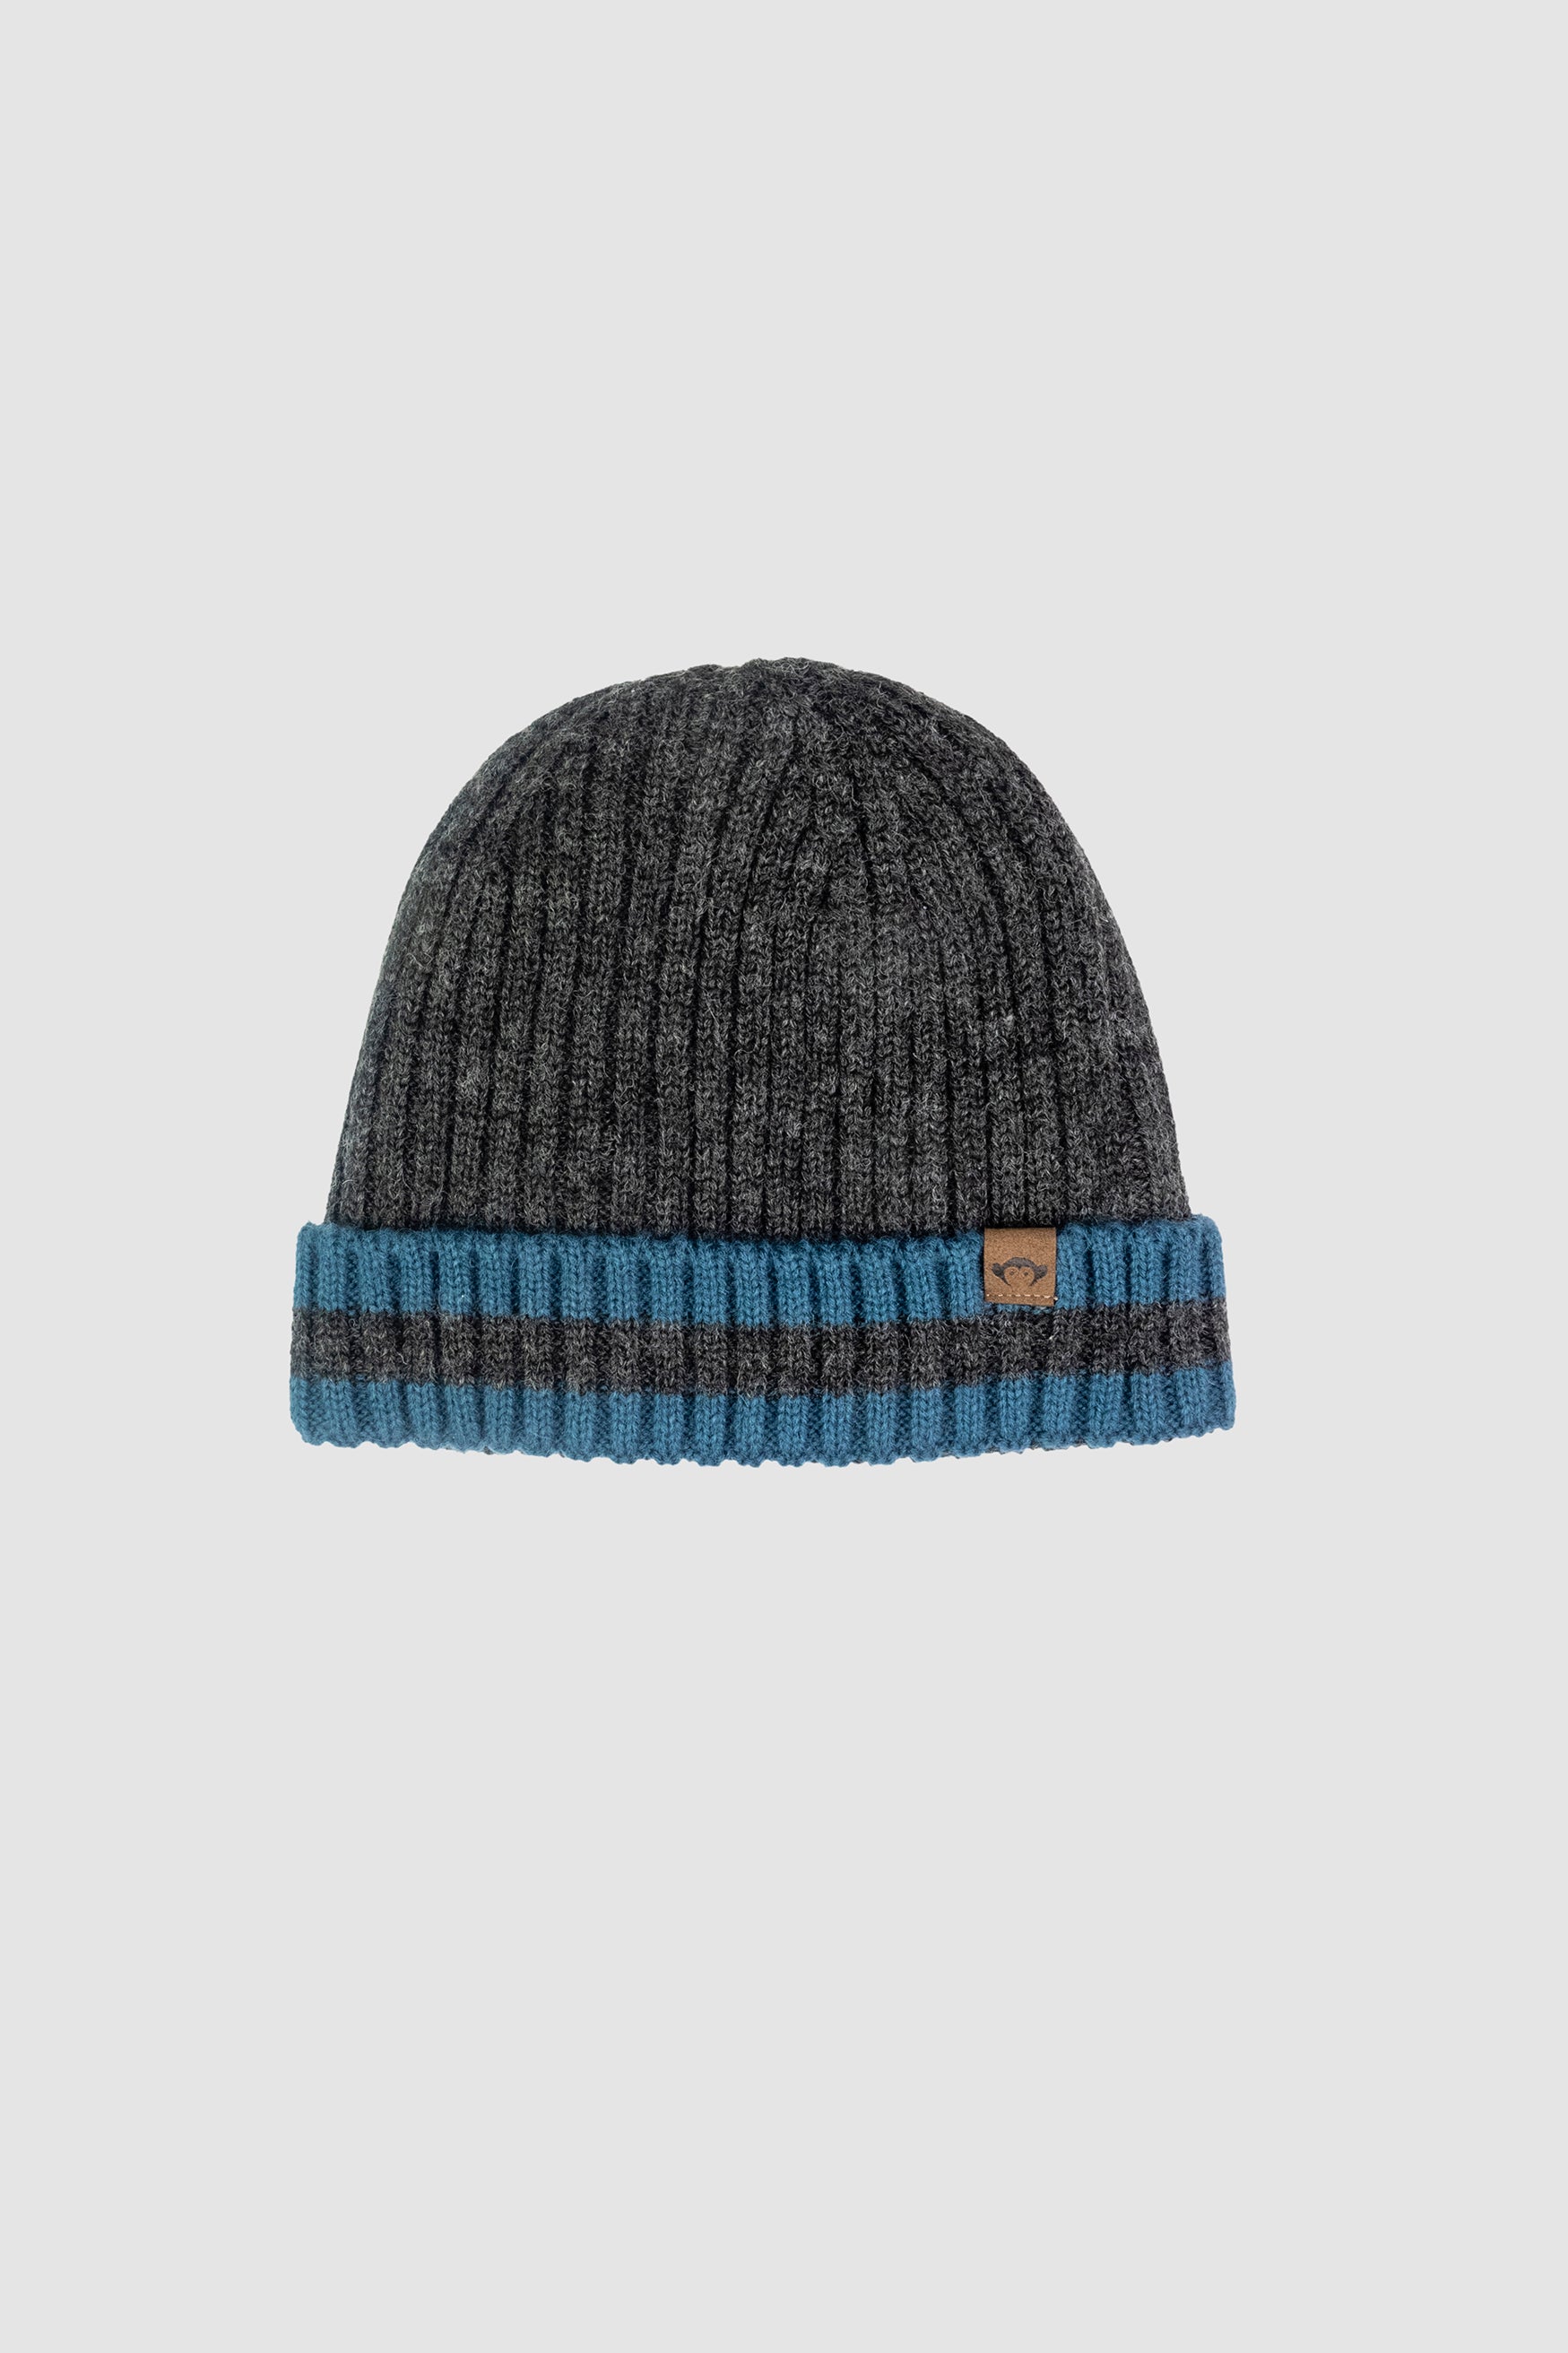 Appaman knit ribbed beanie in grey and blue